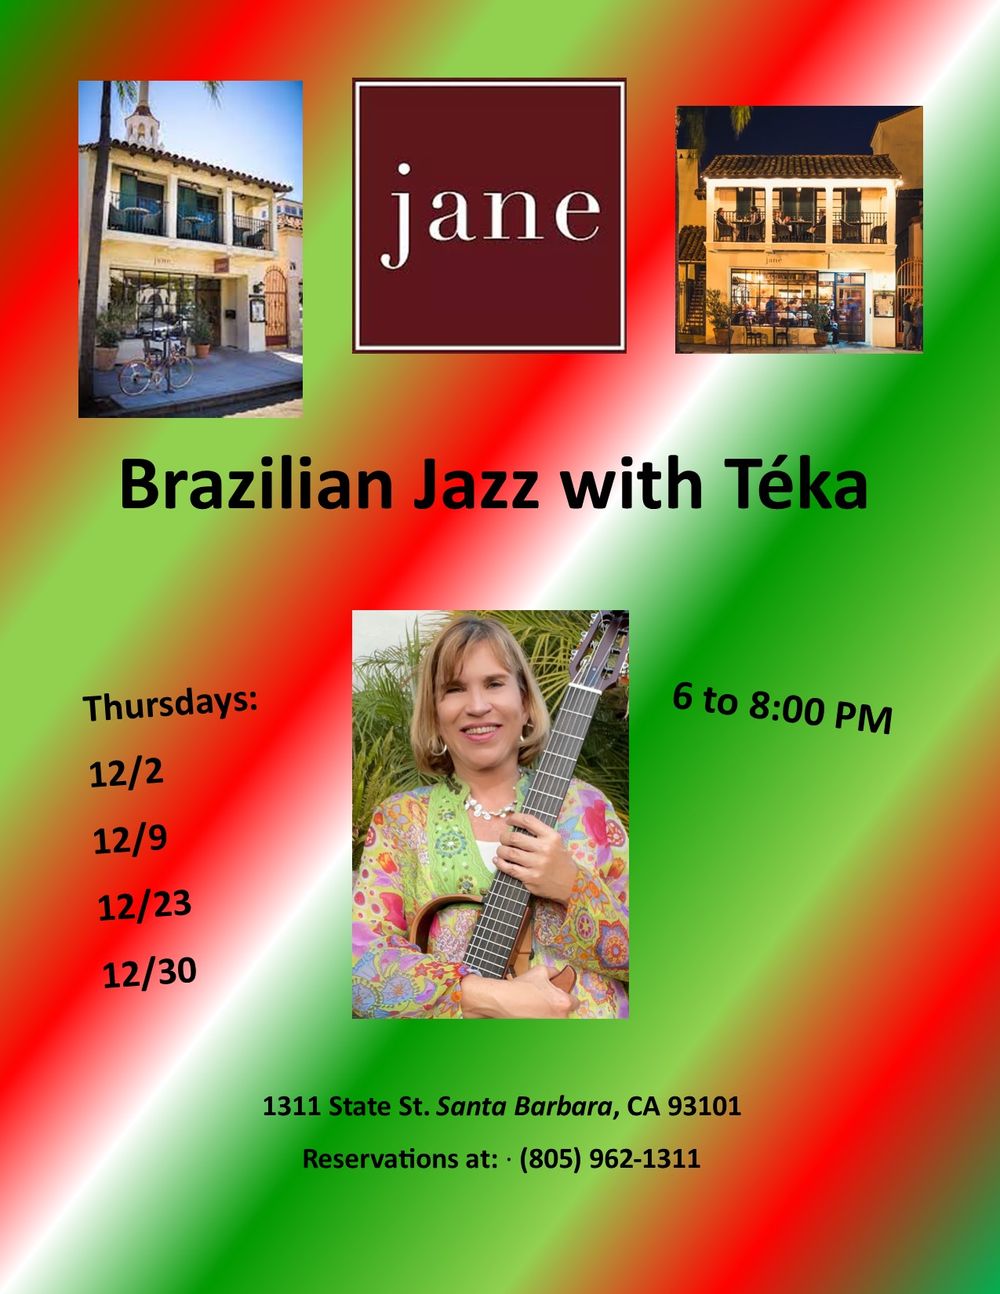 Stop by for some great American cuisine and Bossa Nova with Téka